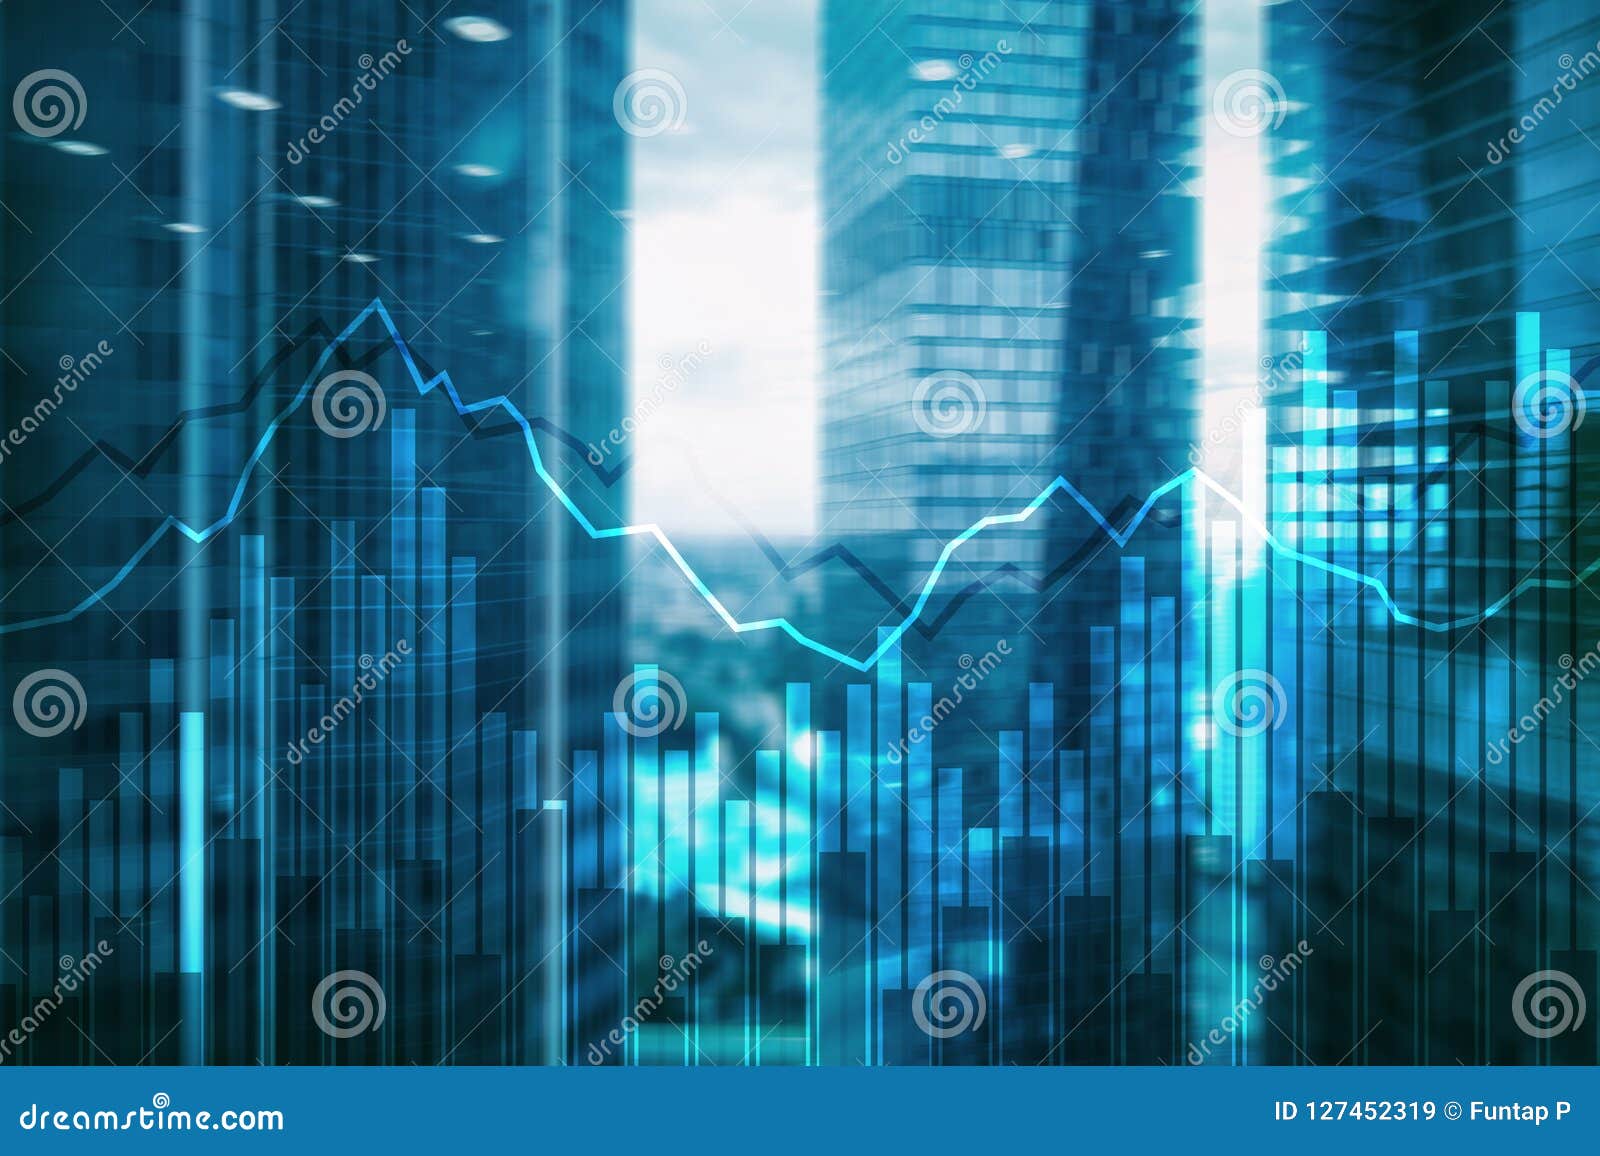 double exposure financial graphs and diagrams. business, economics and investment concept